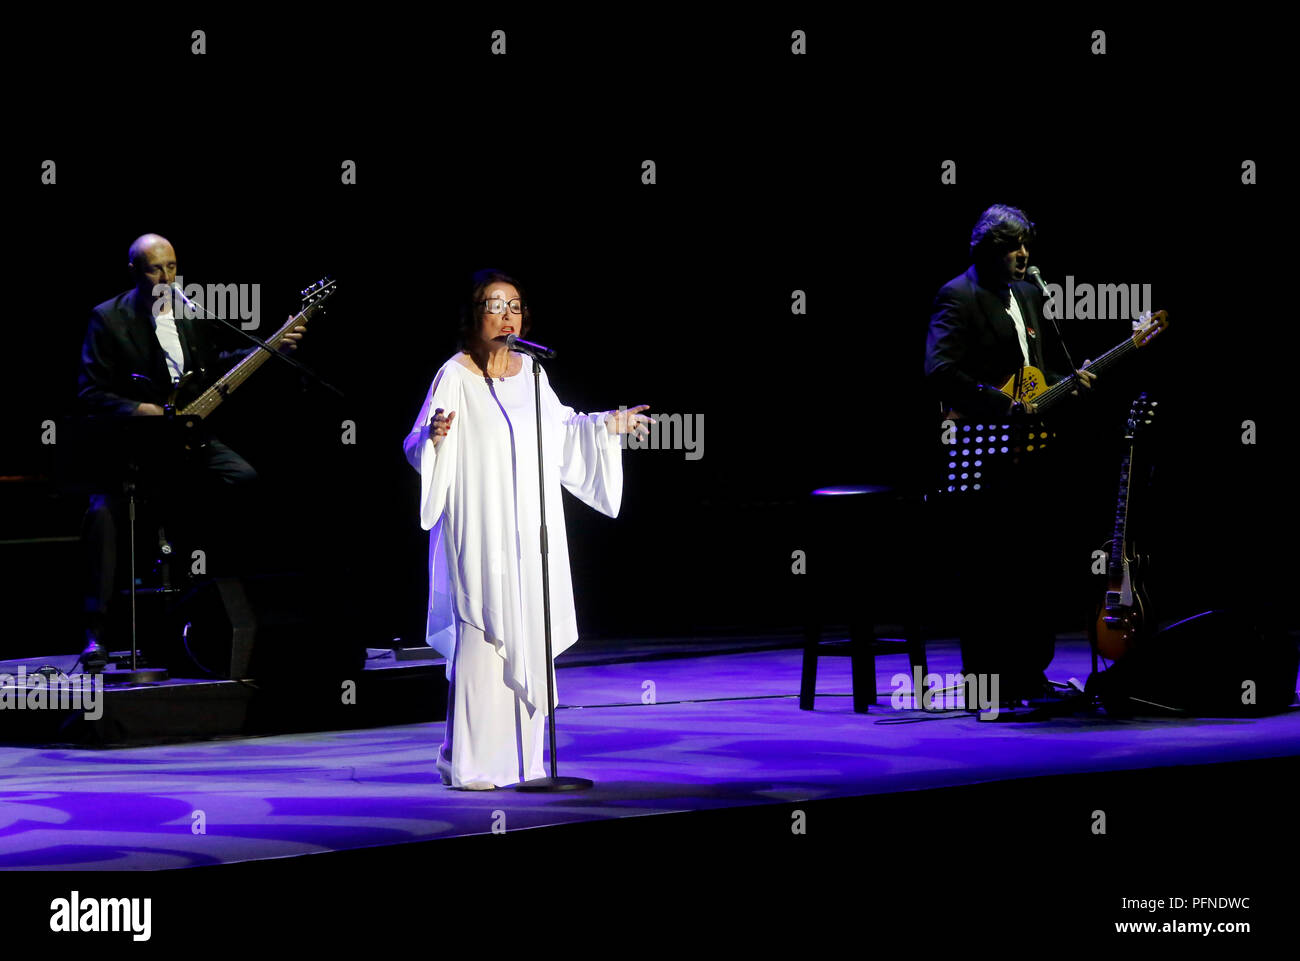 Byblos. 21st Aug, 2018. Greek singer Nana Mouskouri (C) performs during the Byblos Festival in Lebanon's northern city Byblos on Aug. 21, 2018. Credit: Bilal Jawich/Xinhua/Alamy Live News Stock Photo